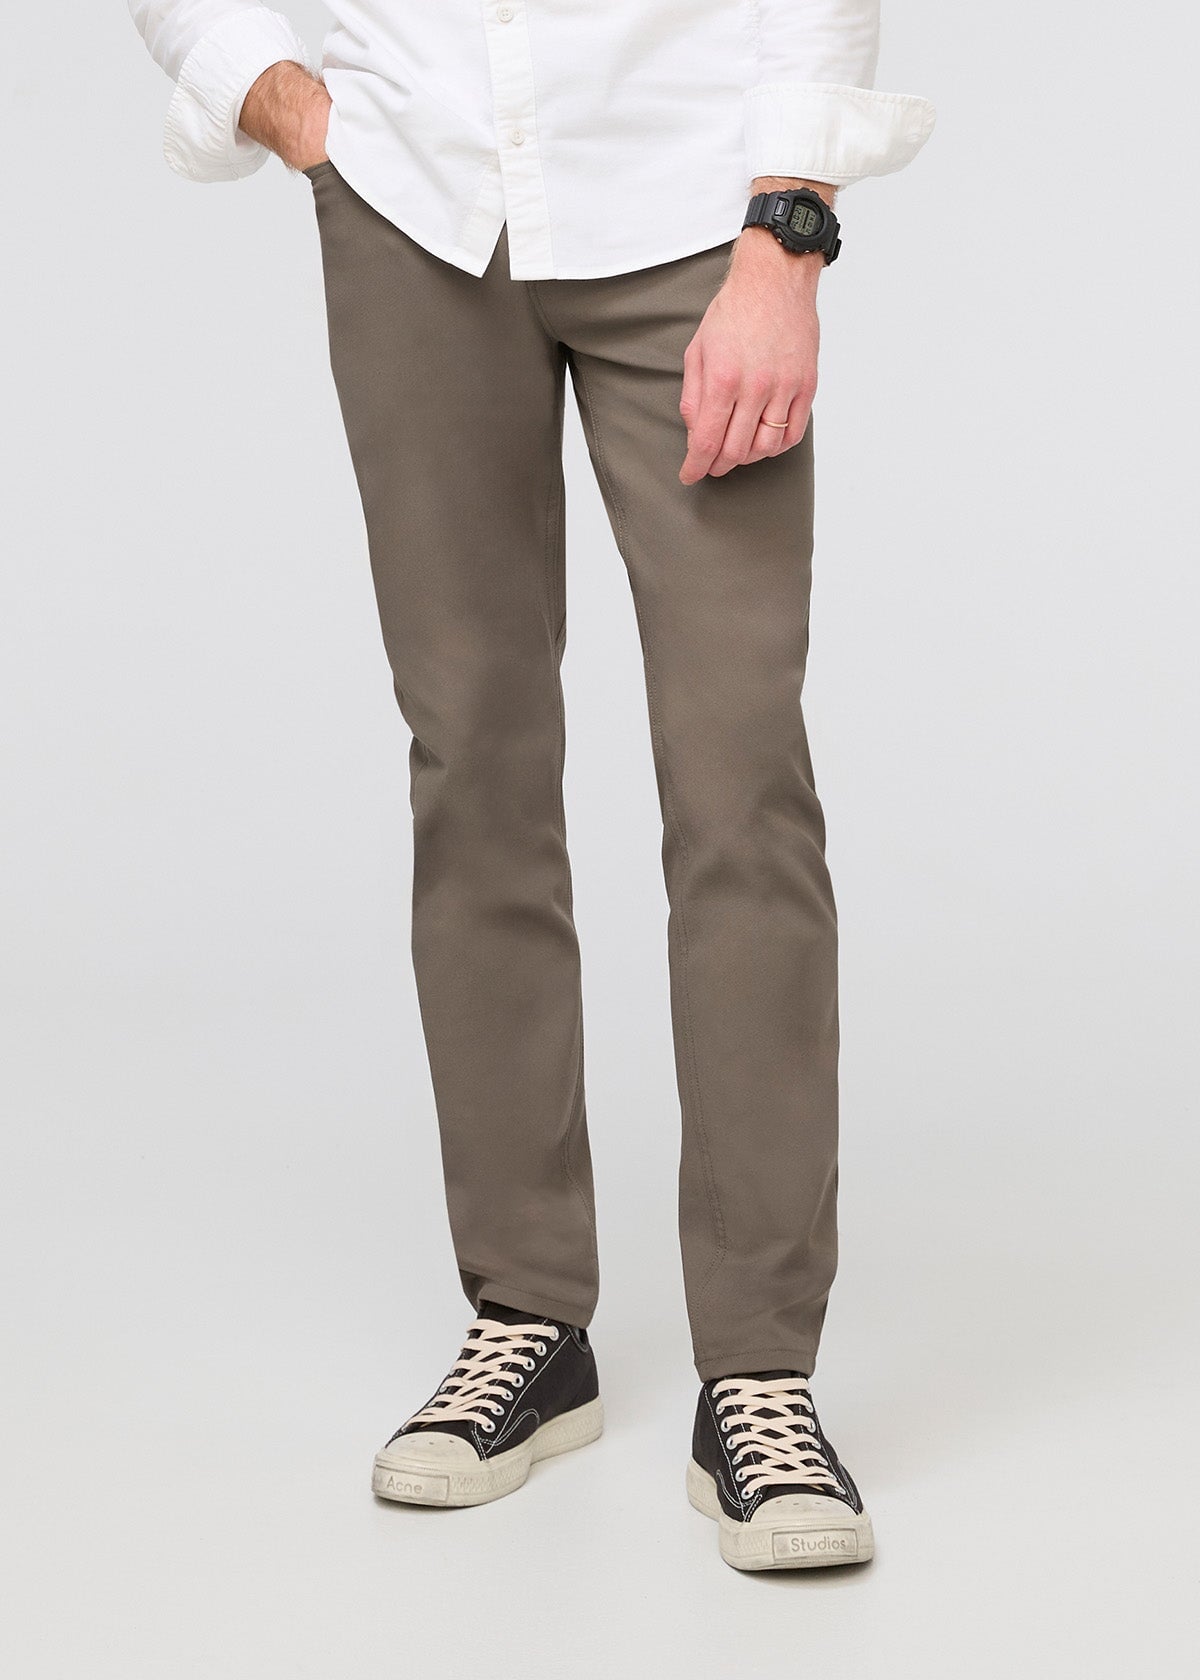 Boracay Flat Front Pant - Bleached Sand - 32 Inseam - Chesapeake Bay  Outfitters